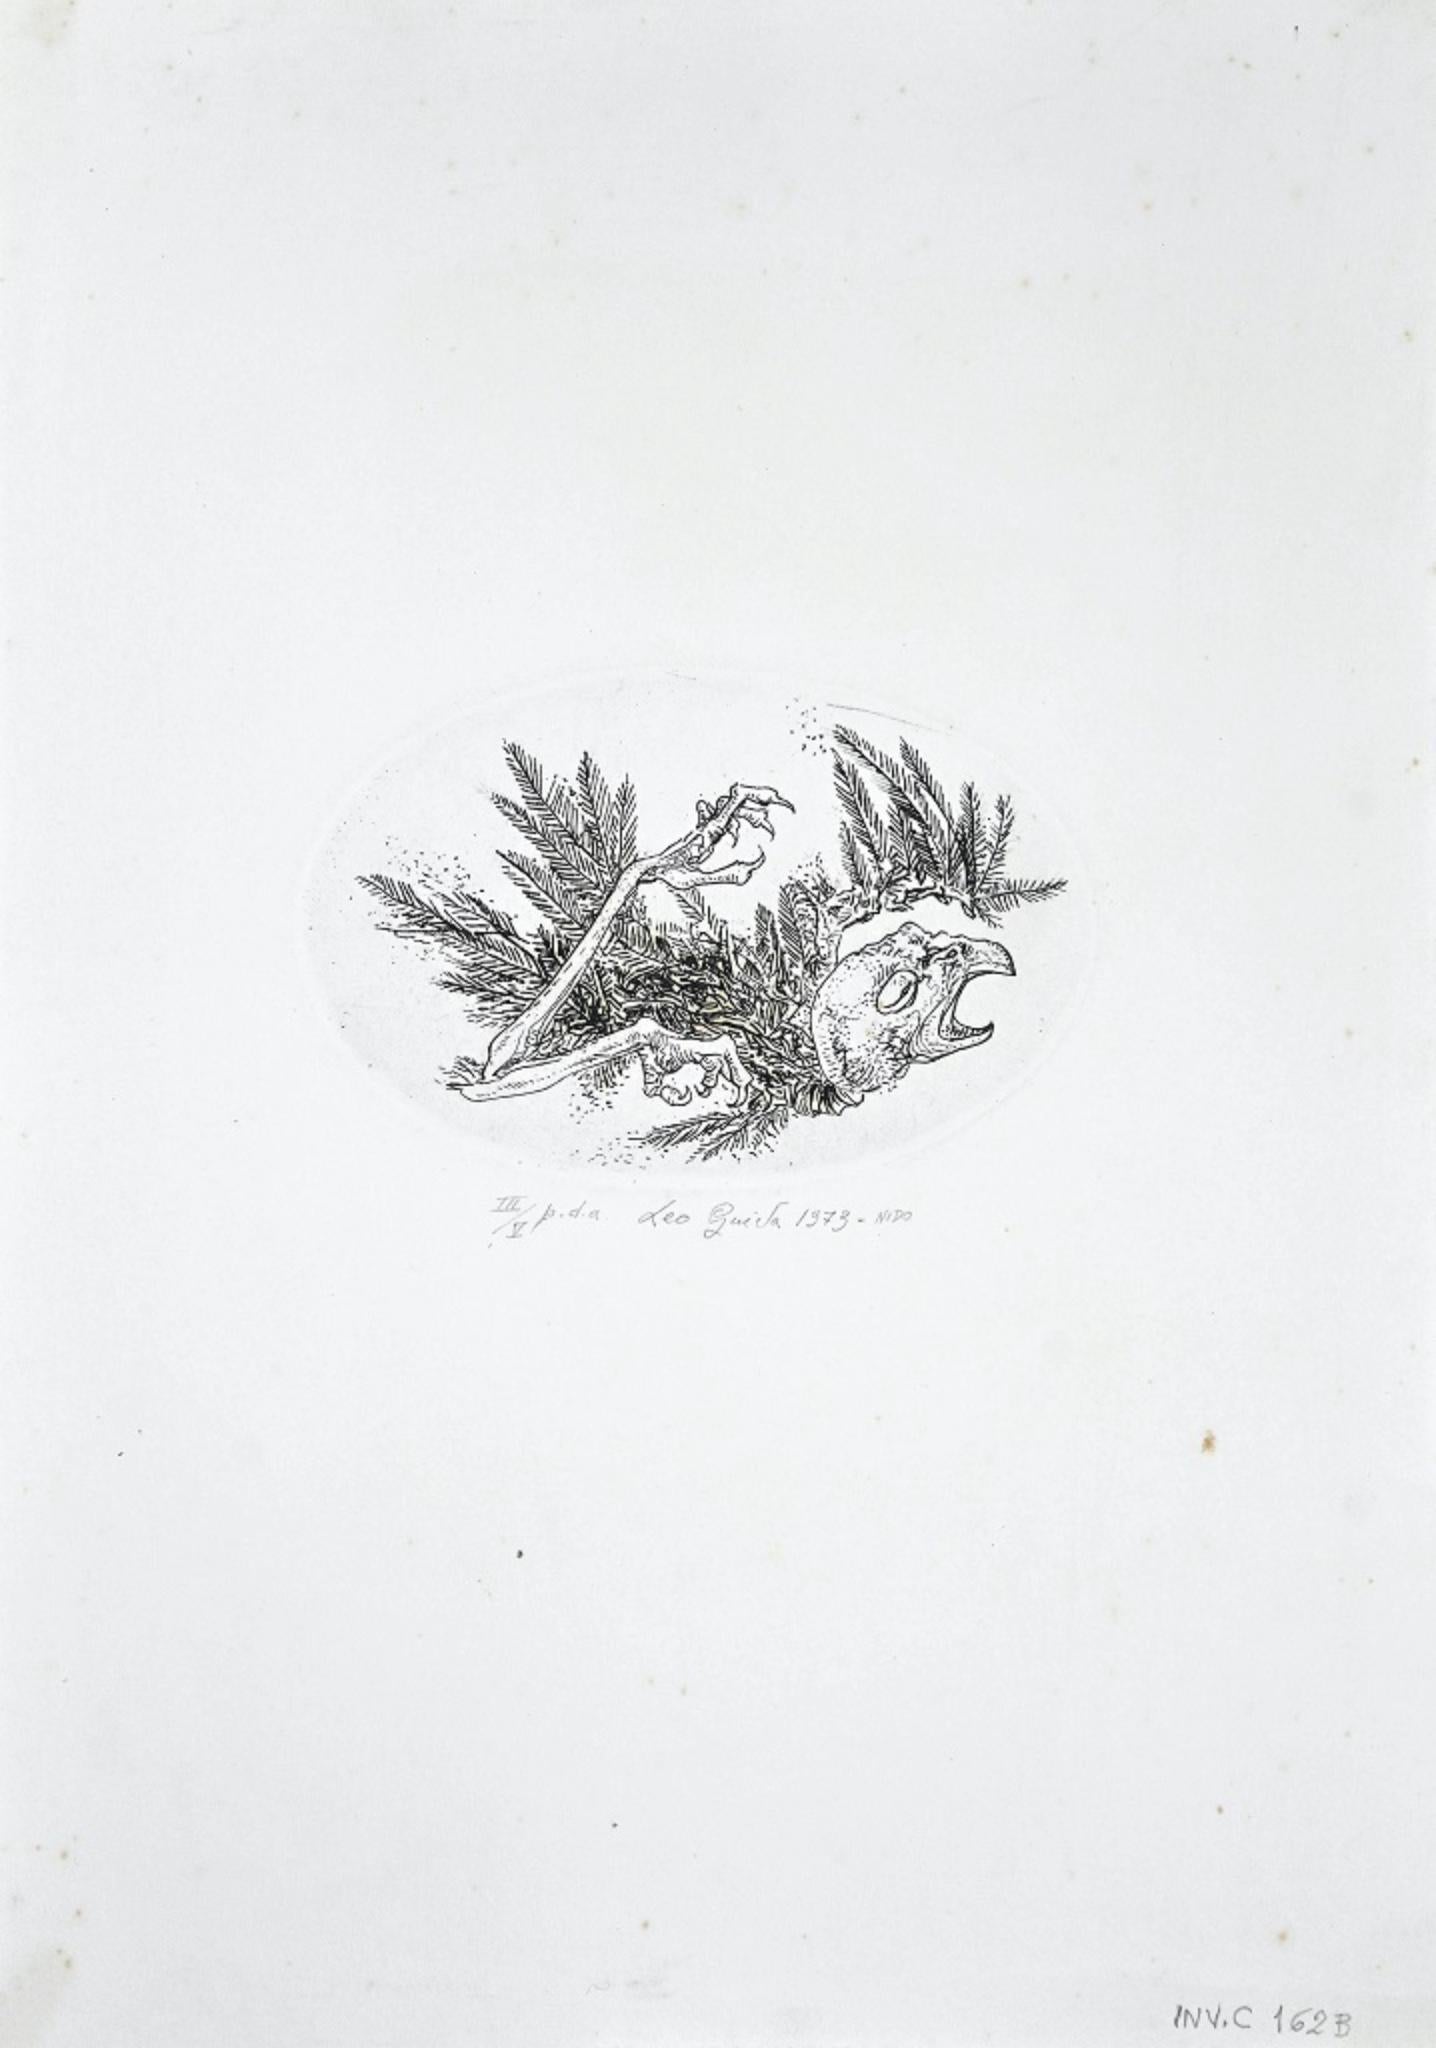 The Nest is an original Contemporary artwork realized in 1973 by the italian artist Leo Guida.

Original B/W Etching on paper.   Image Dimensions: 13 x 0.1 x 19.5 cm.

Numbered, hand-signed, Dated and Titled in pencil on the lower right margin by